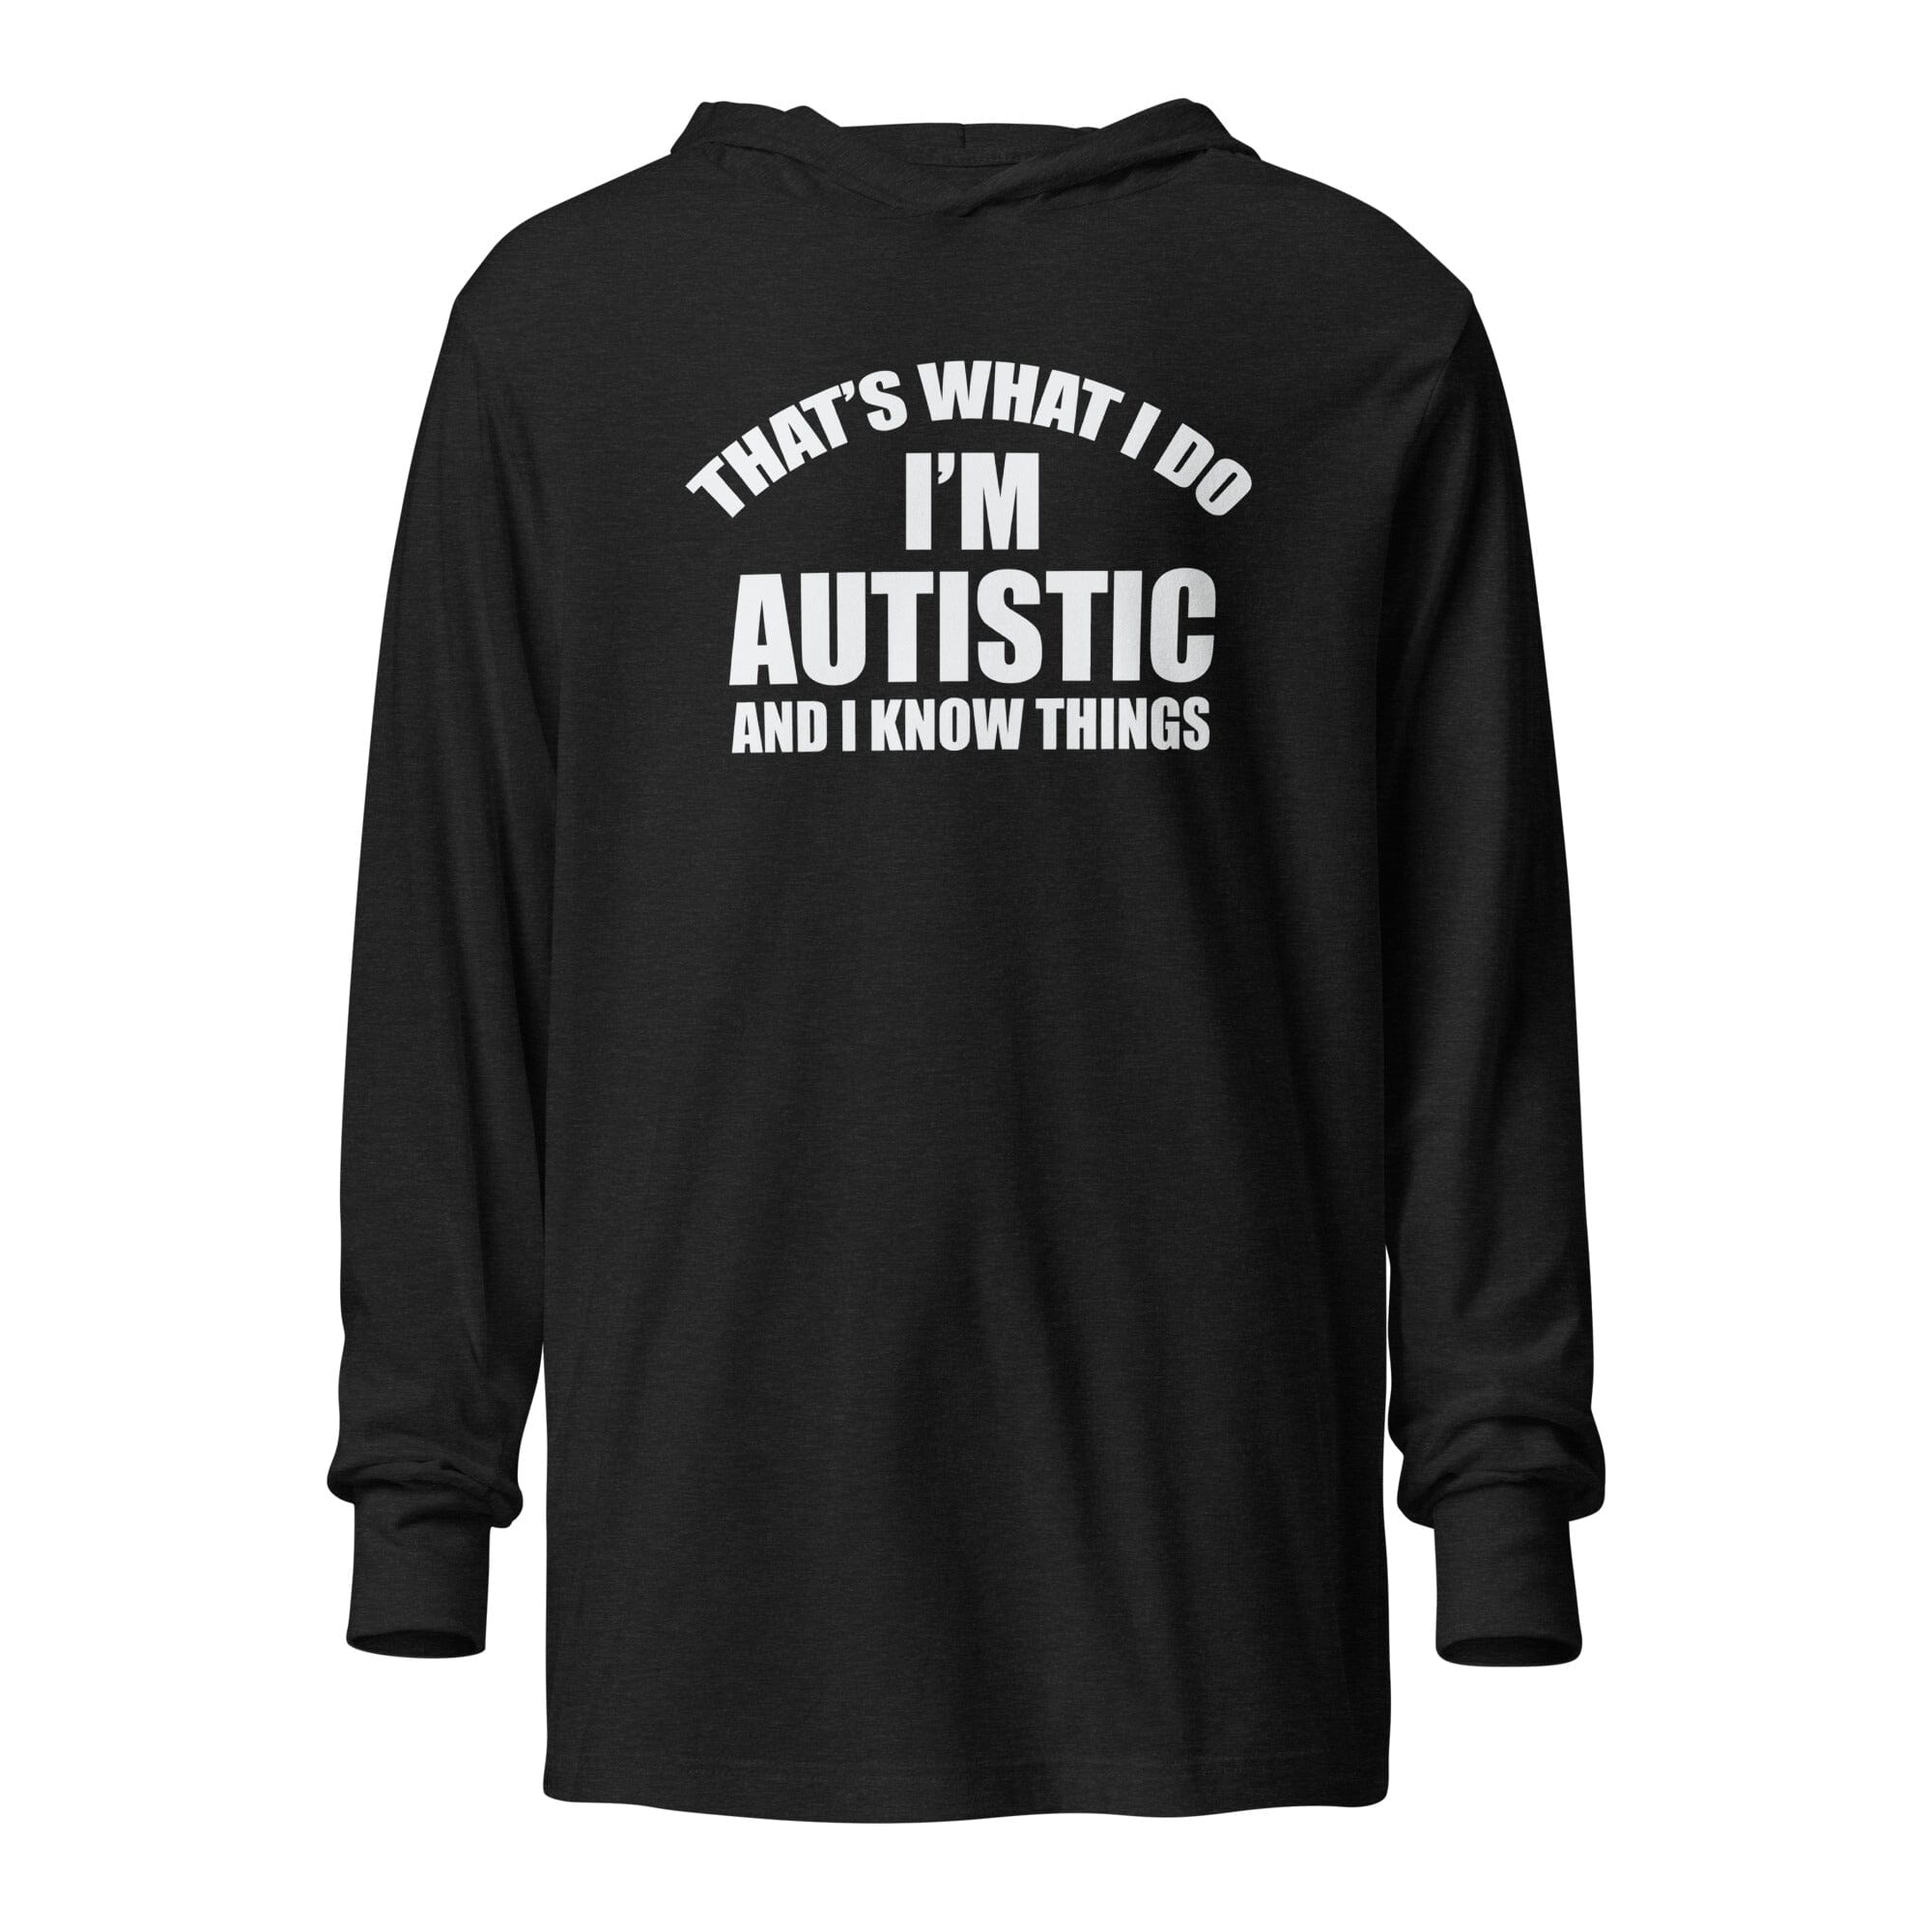 That's What I Do, I'm Autistic and I Know Things Unisex Hooded long-sleeve tee The Autistic Innovator Charcoal-Black Triblend XS 